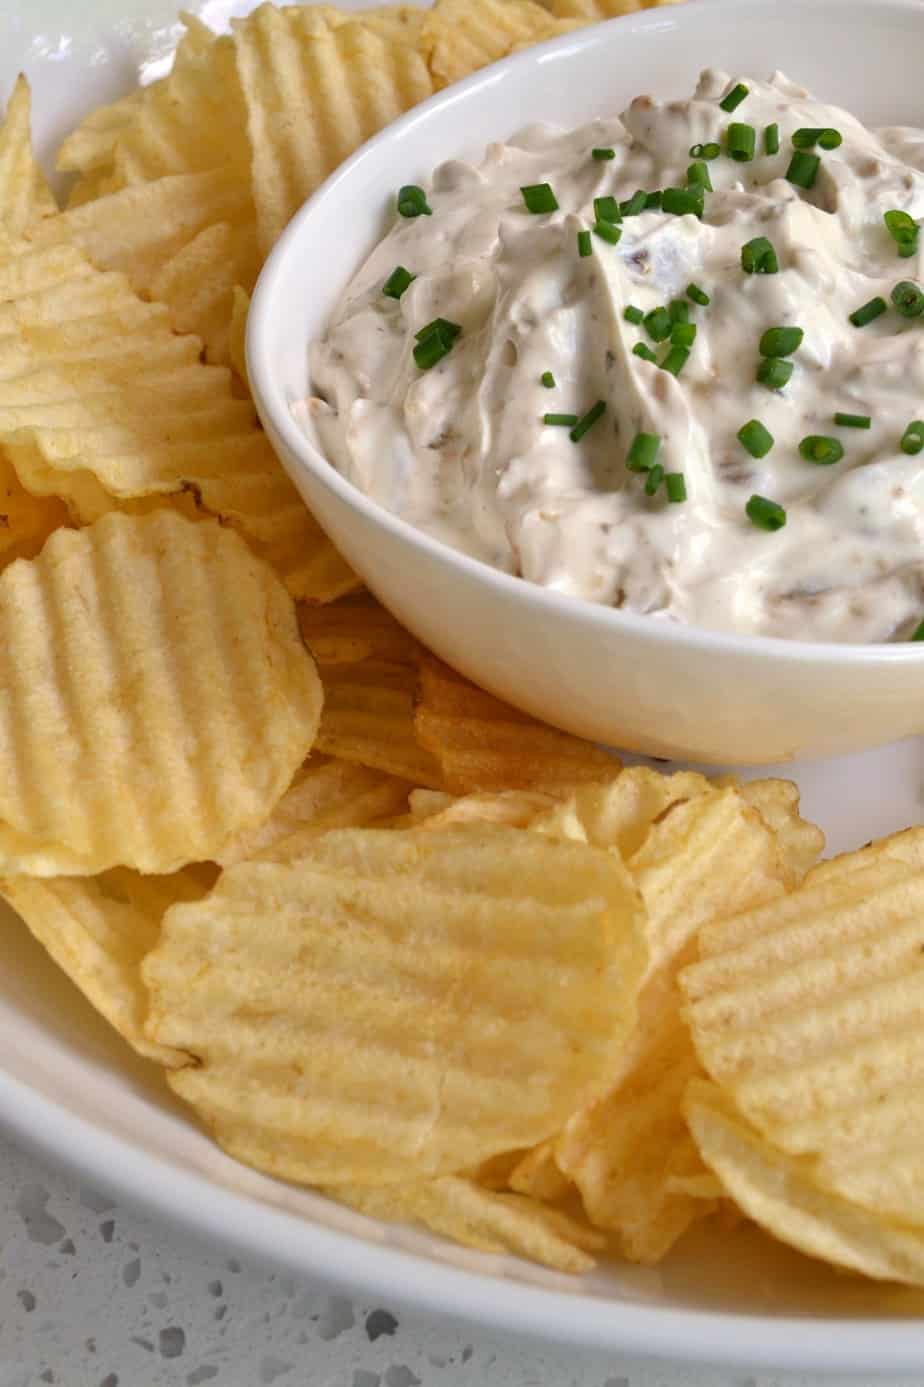 This crowd loving French Onion Dip is made with sweet caramelized onions, sour cream, mayonnaise and a few pantry spices.